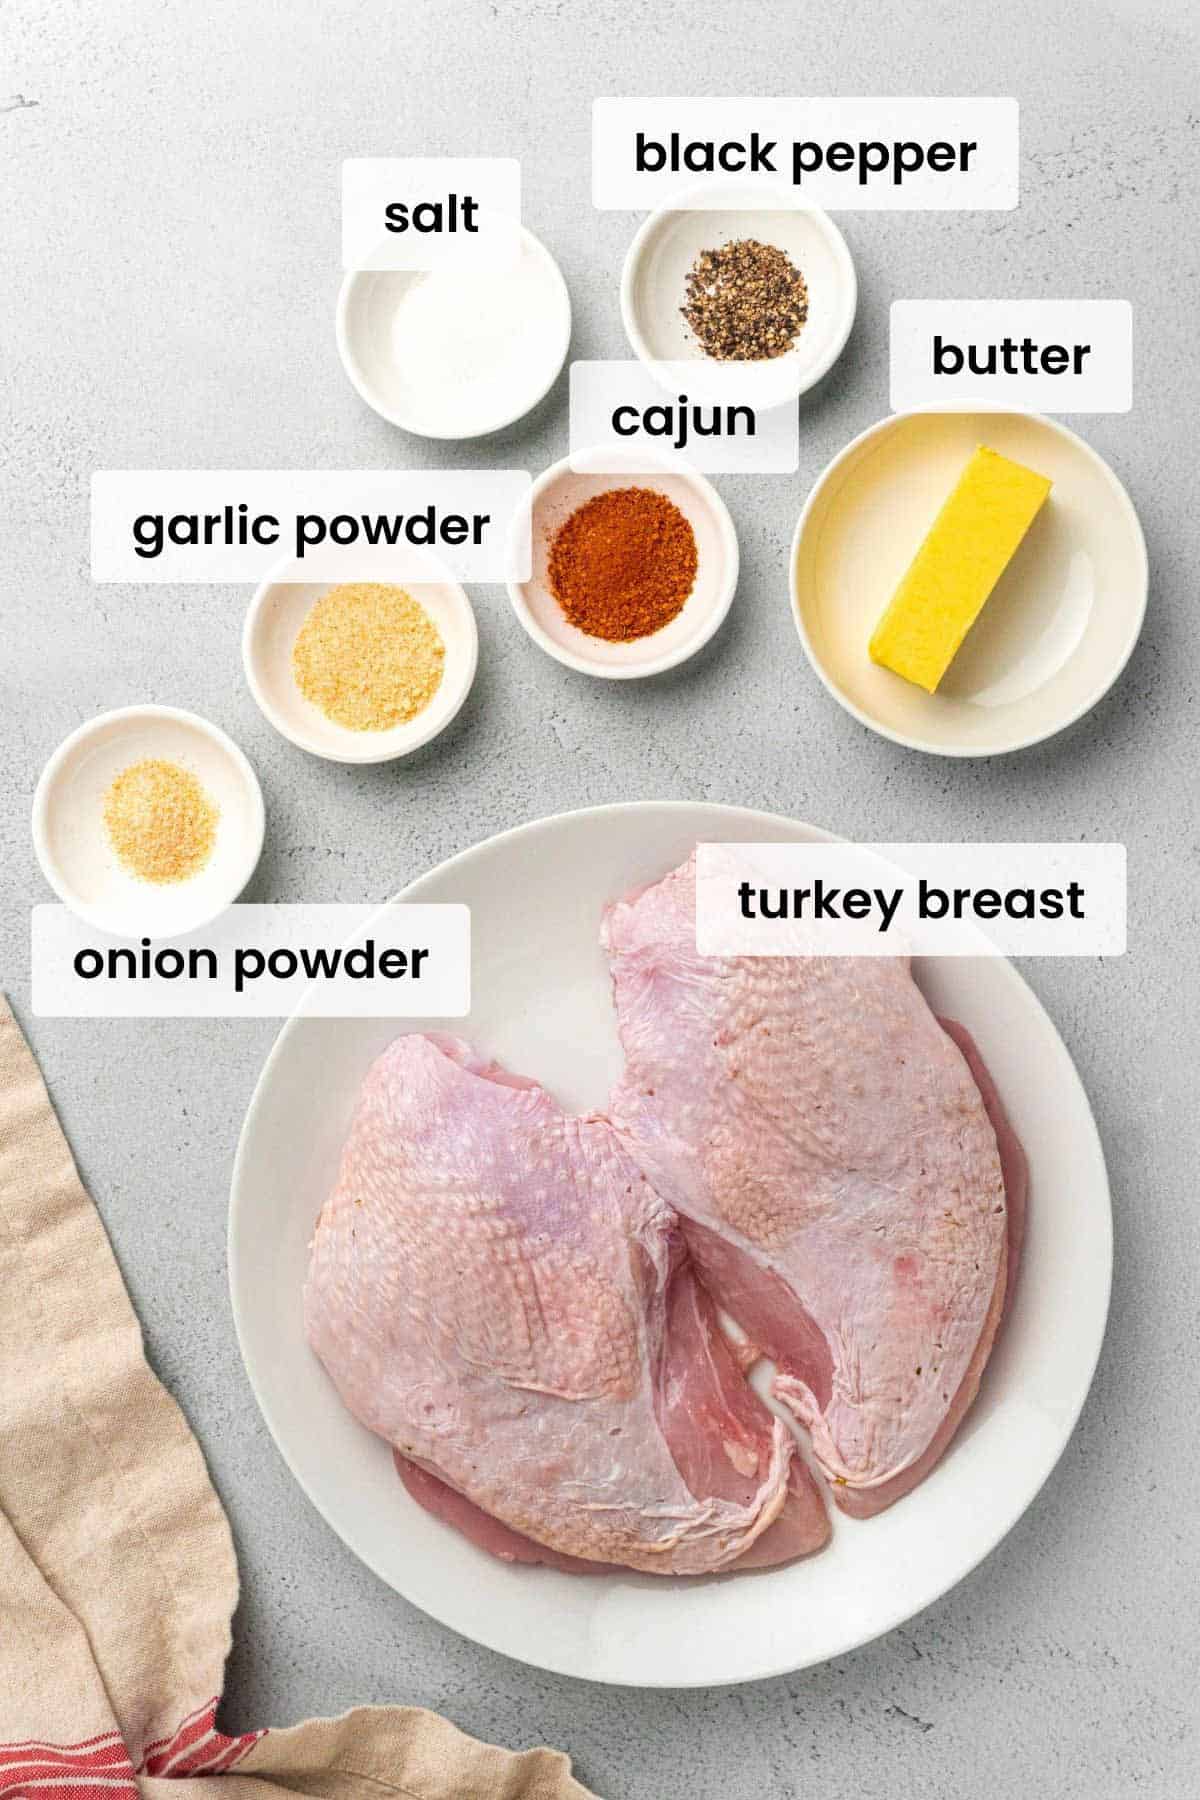 ingredients for roasted turkey breasts.